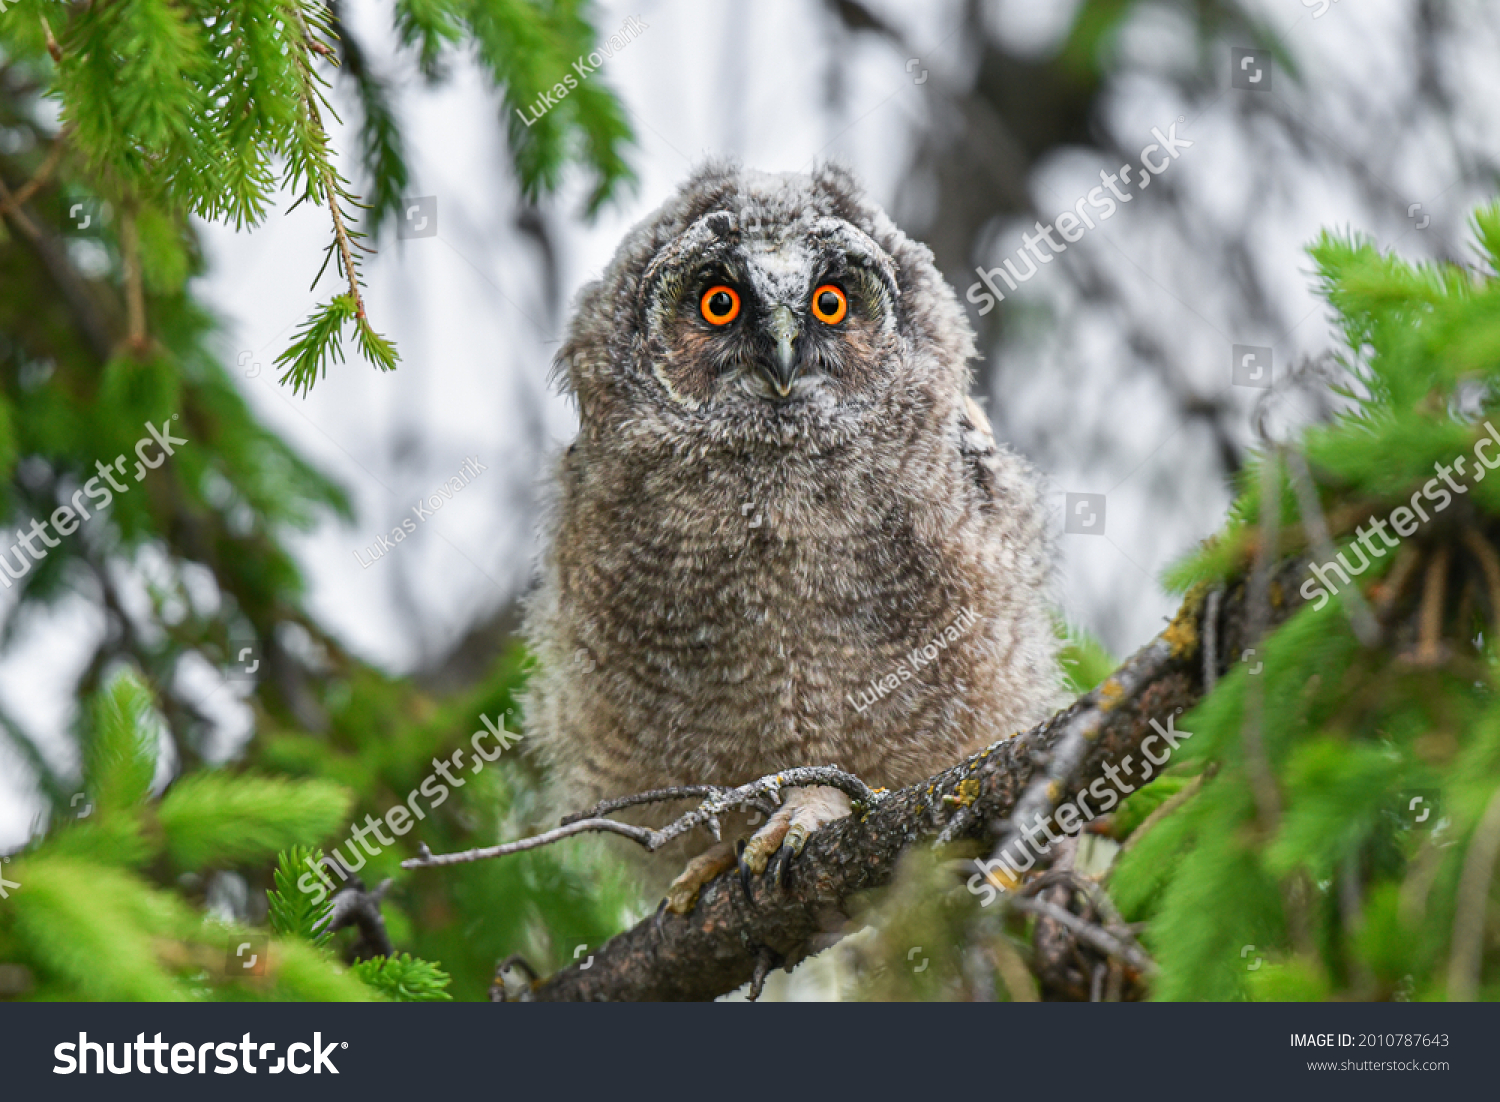 Eyes of an owl, Cute Long-eared owl chick staring with big brigt eyes, Funny owl baby sitting on tree, curious Asio Otus, adorable owl portrait, young hunter growing up, baby raptor #2010787643